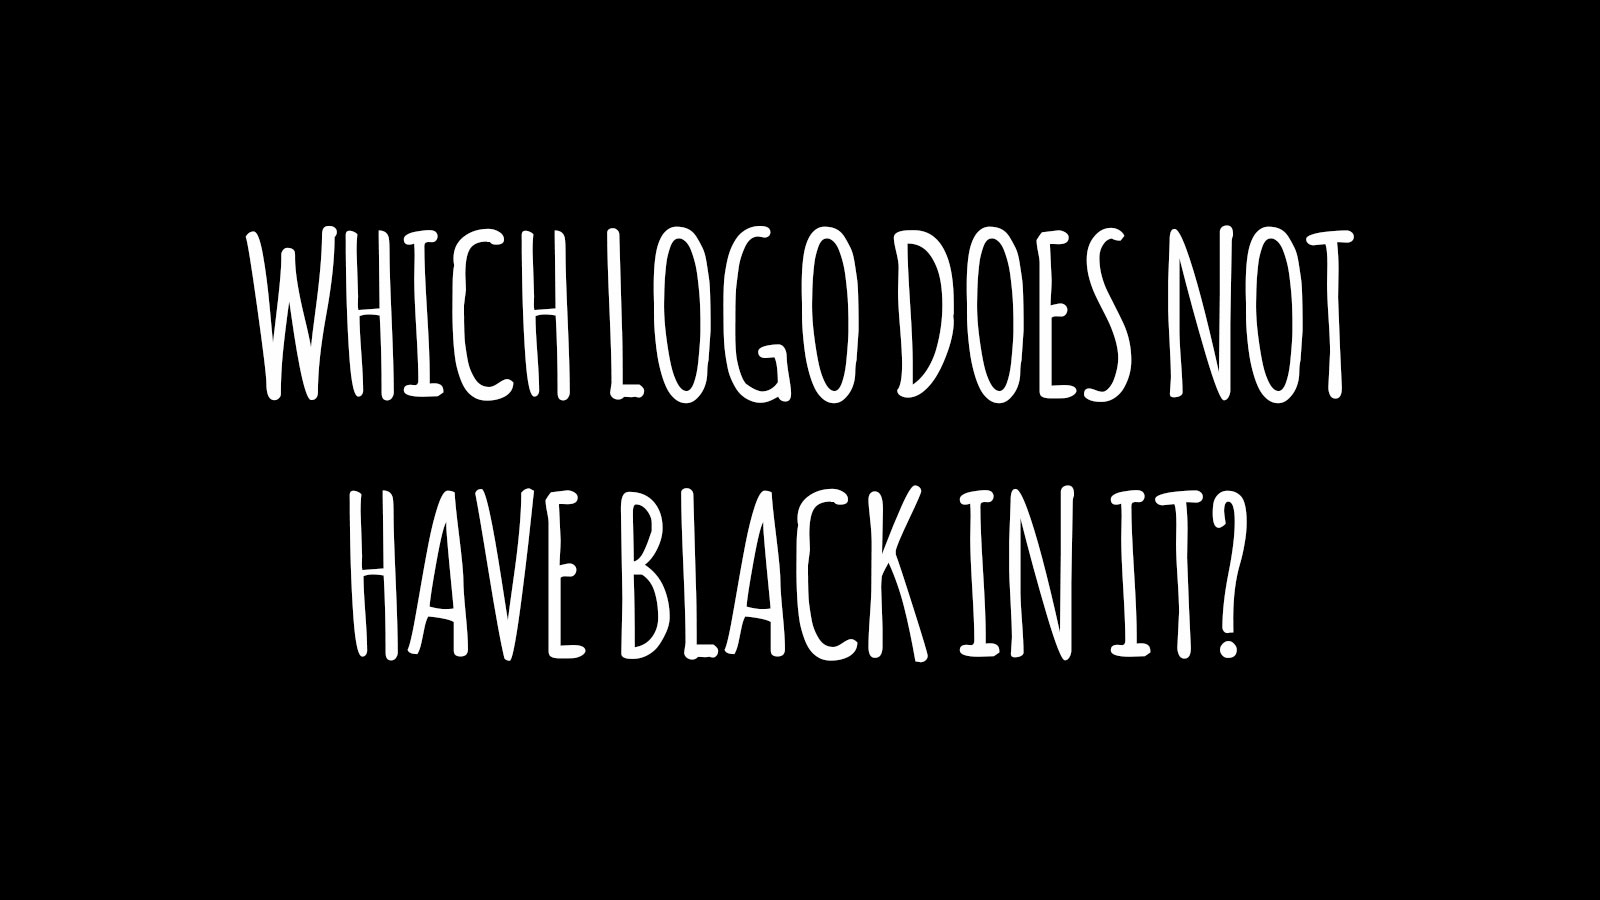 Can You Recognize These Popular Logos Without Color? 137